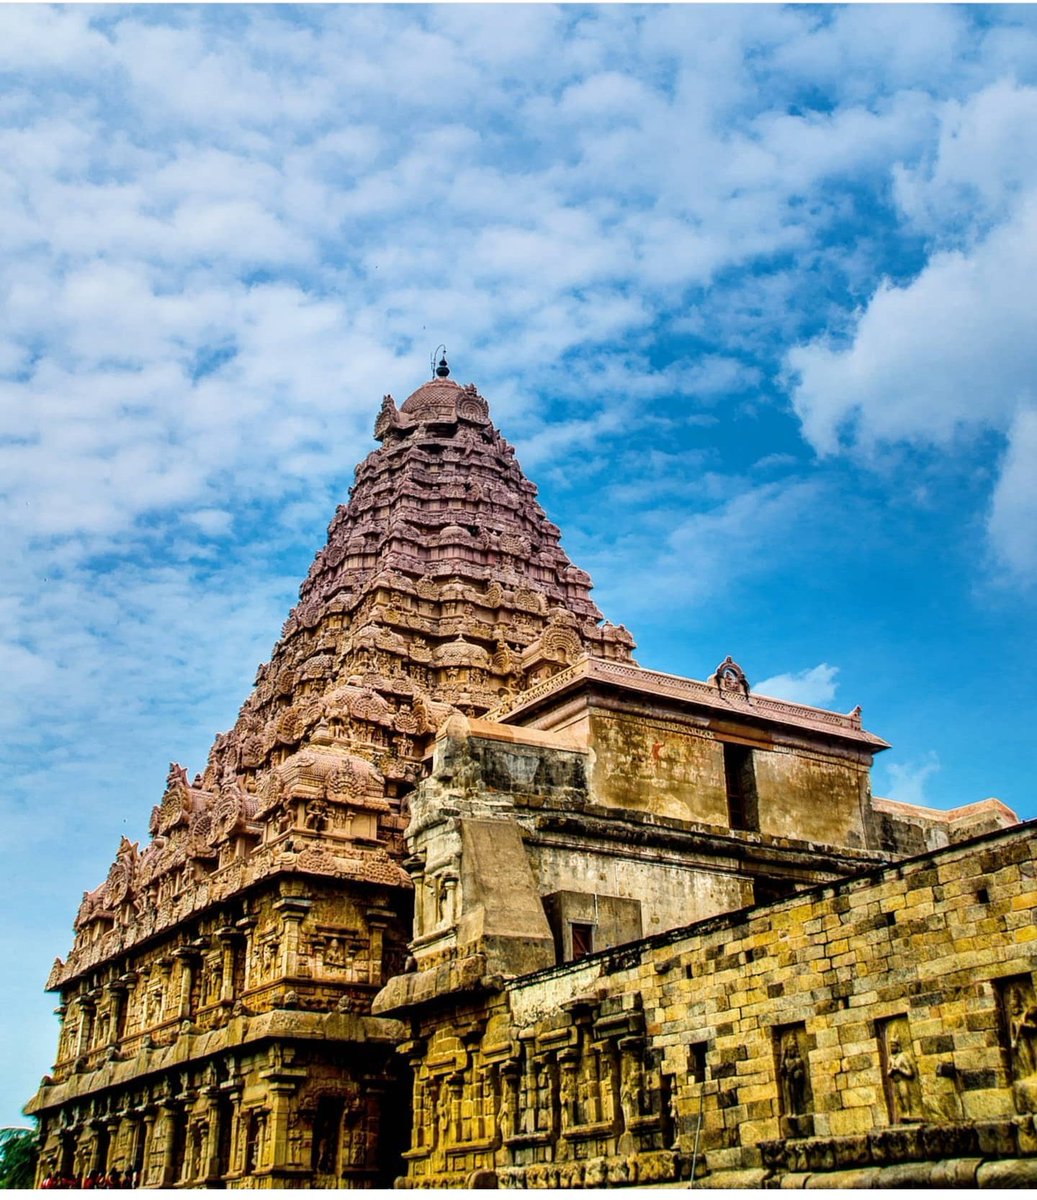 Why only our Temples:The State governments collect 23.4% tax on the income of the temples including endowment administration tax (15 %), audit fee (2 %) and common good fund (2%).But such taxes rules are not applicable for ¢hurch and Møsqûe #FreeHinduTemples